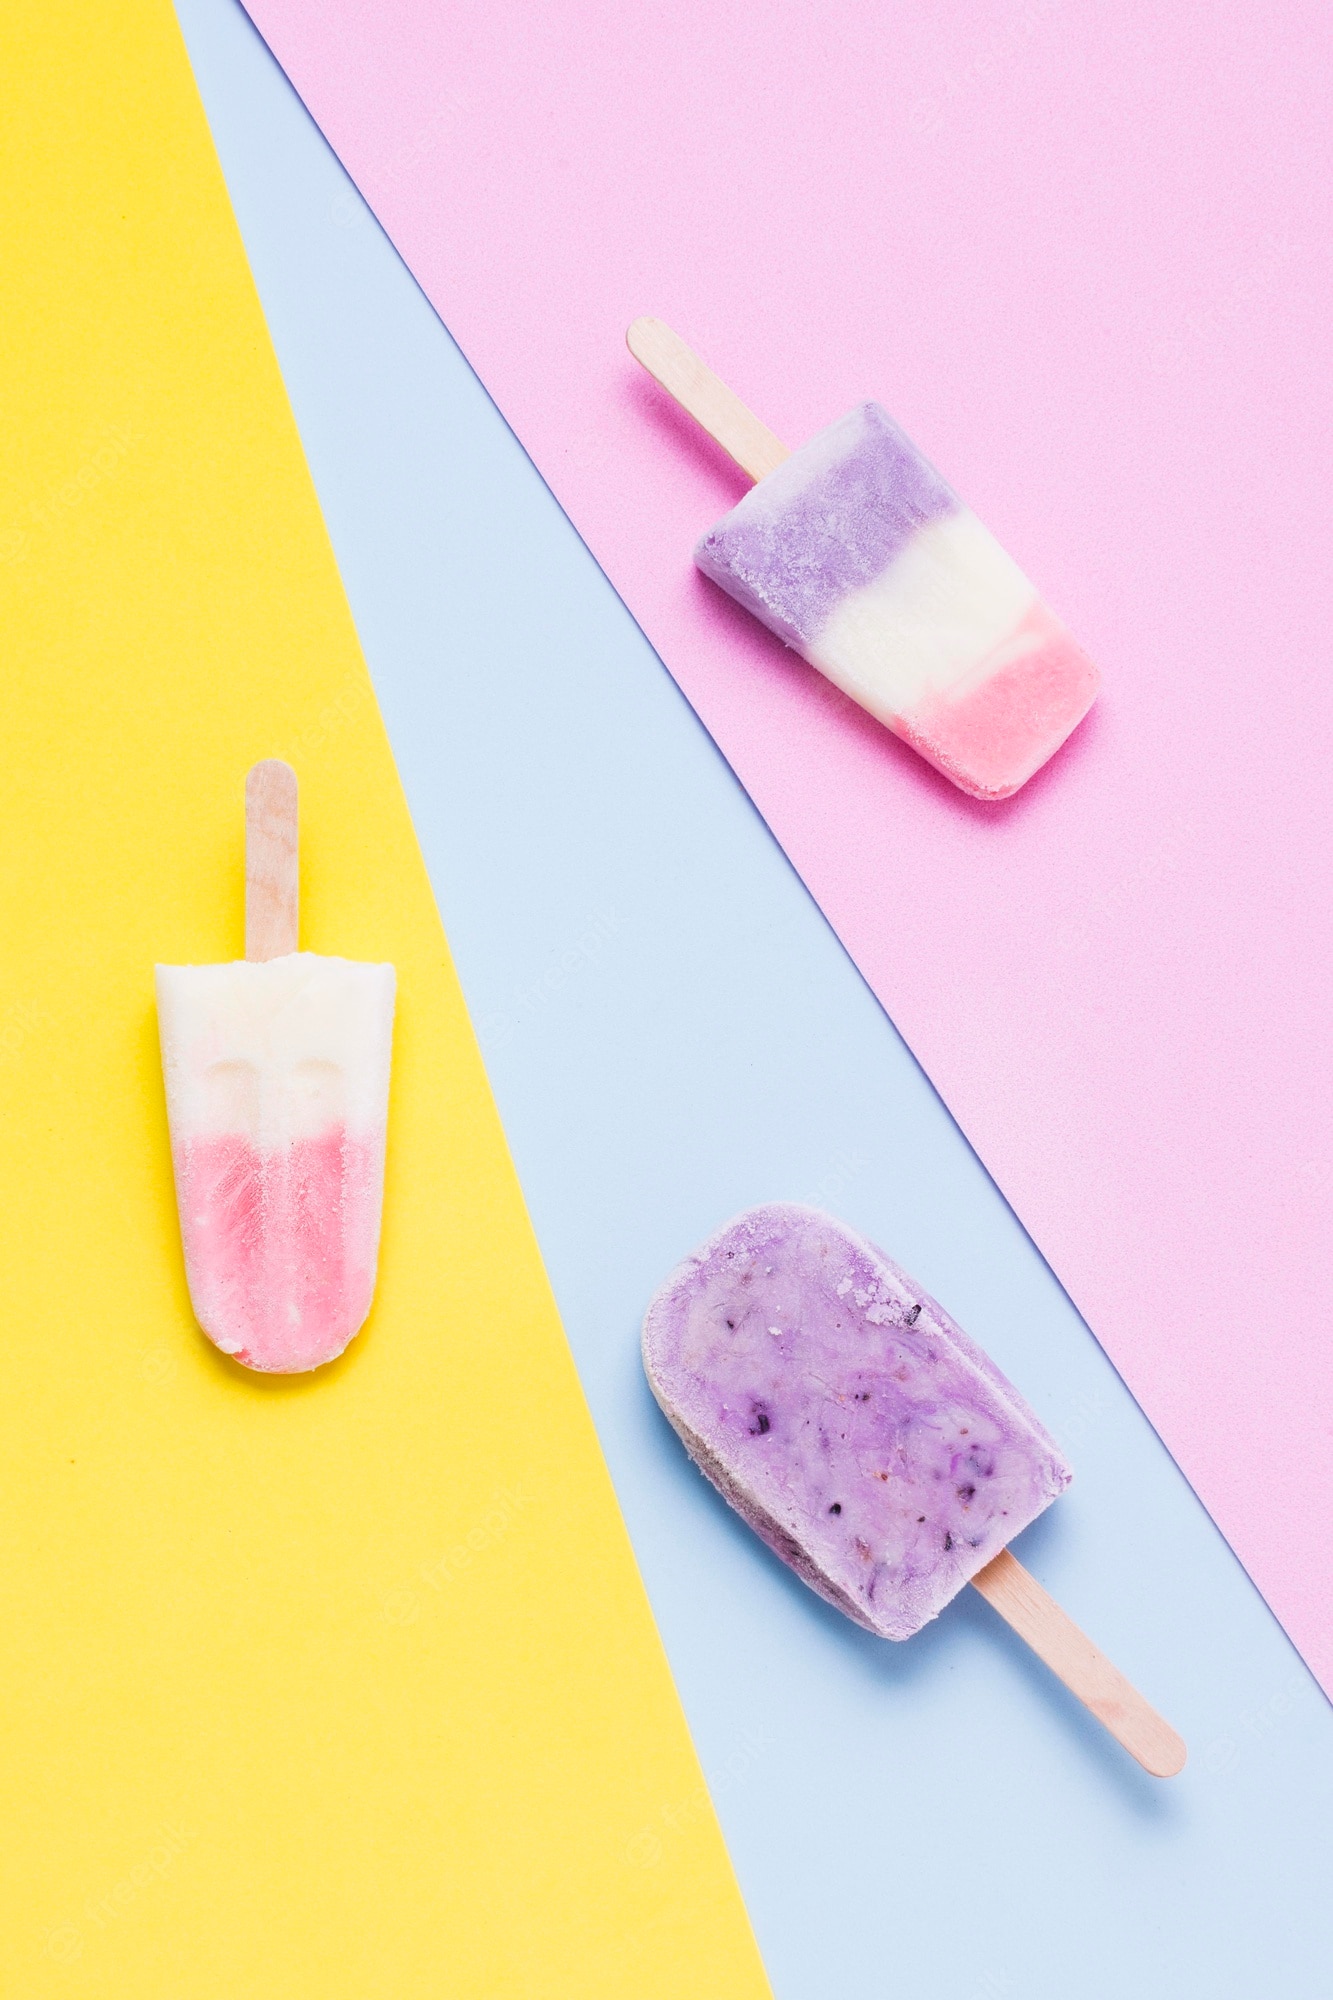 Three popsicles on a yellow, blue, and pink background - Ice cream